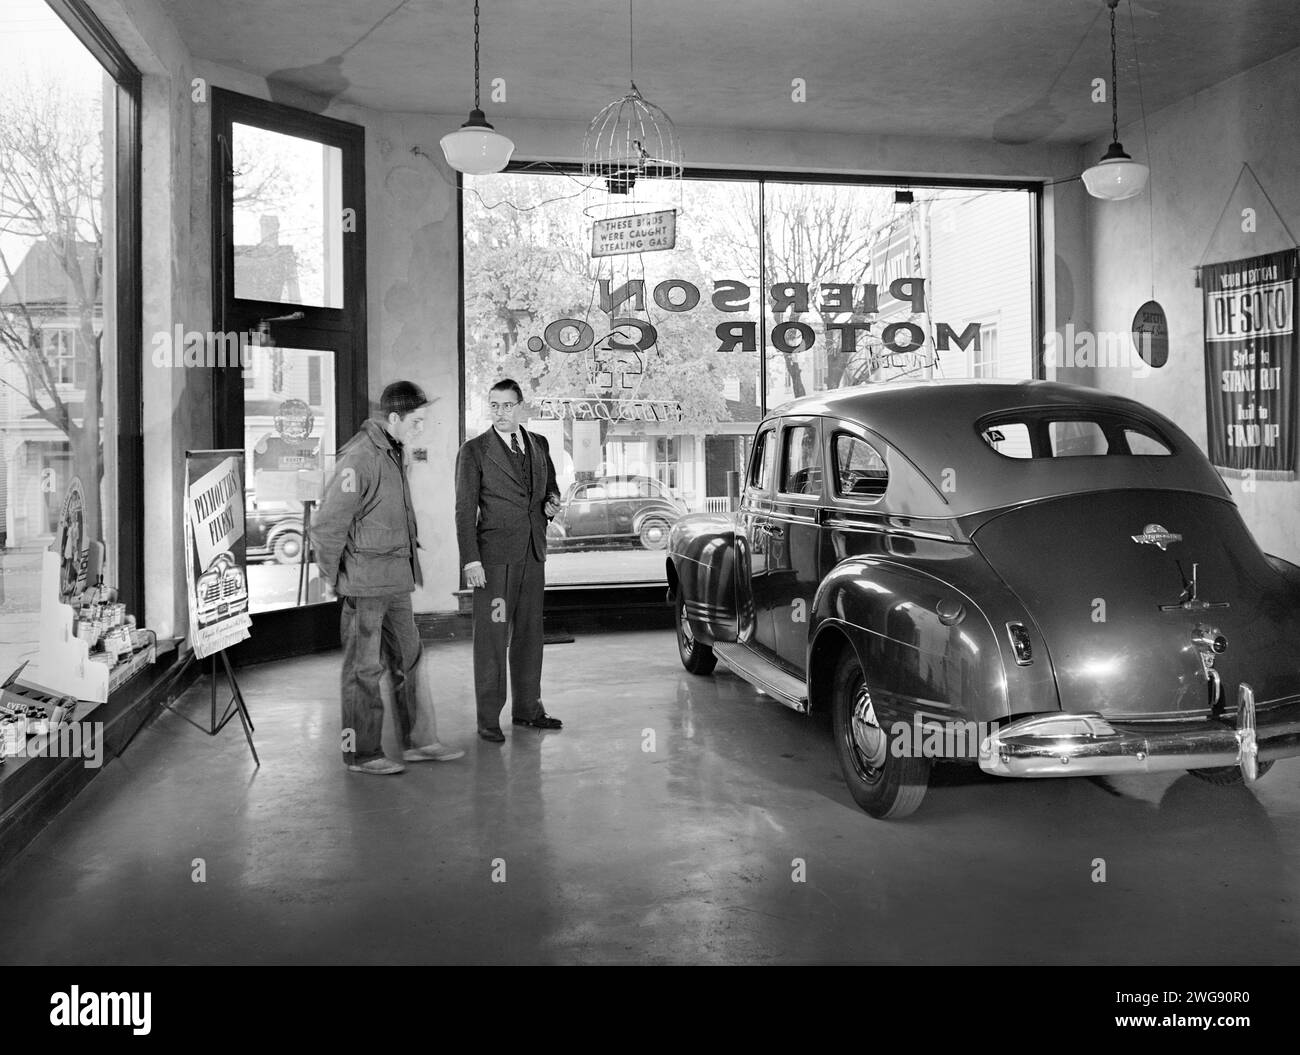 Pierson Motor Company showroom owned by Al Pierson (right) who is showing his one second-hand car to local farmer. Before World War II there always were three brand new cars in his showroom, now during the war, the chief business is repairing, Lititz, Pennsylvania, USA, Marjory Collins, U.S. Office of War Information, November 1942 Stock Photo